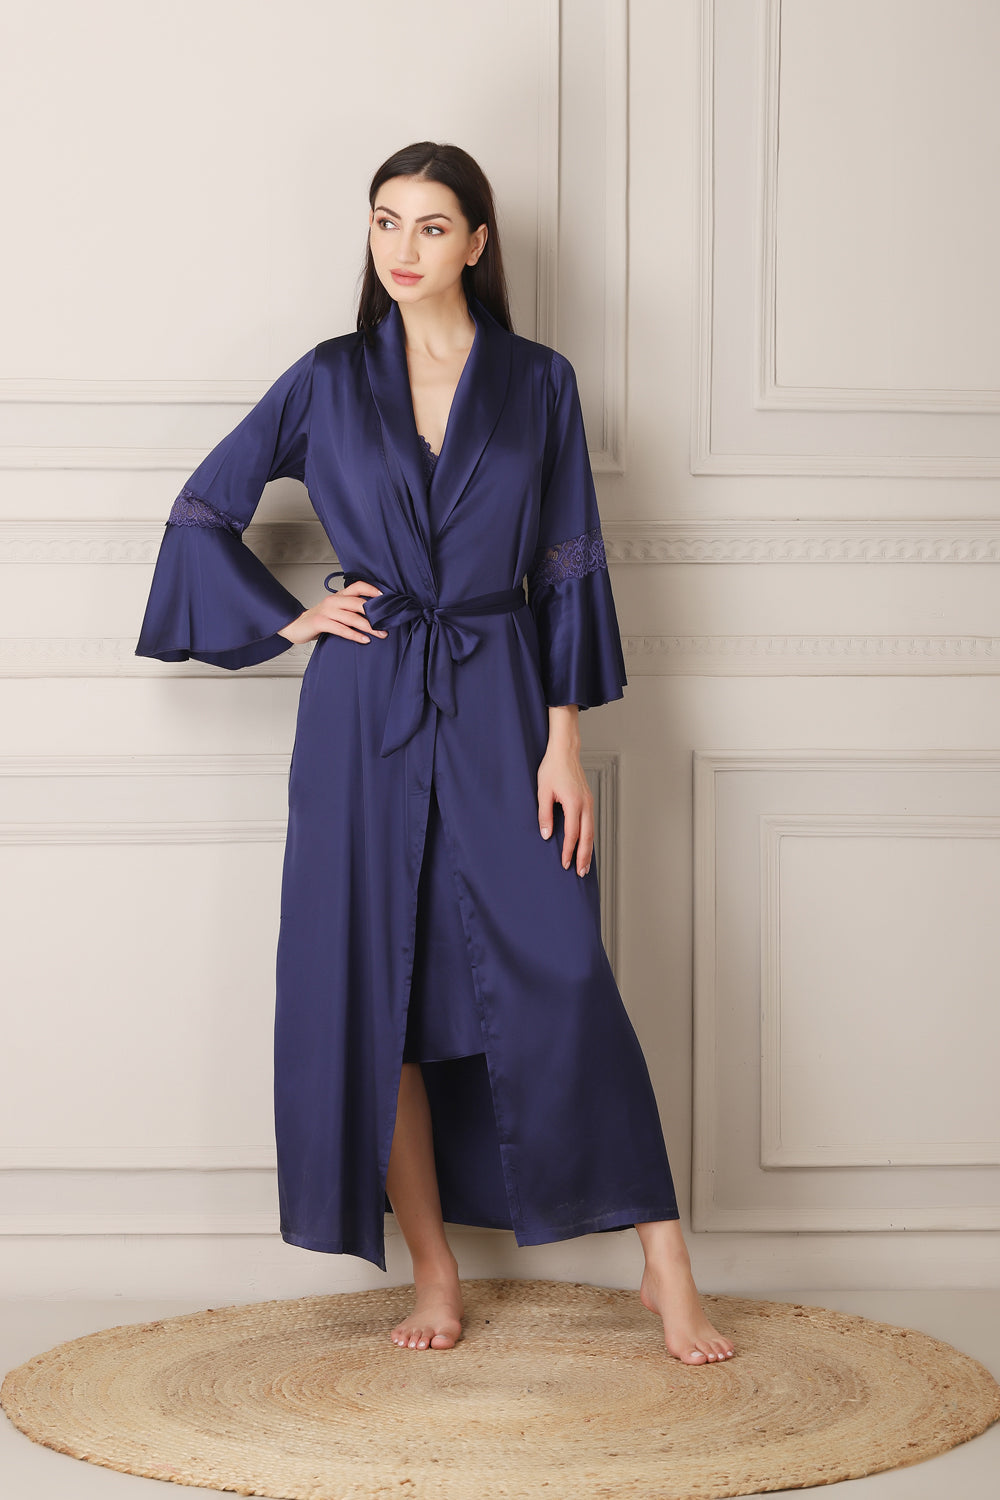 Satin Nightgown set in Navy blue Satin with Ruffle sleeves Private Lives